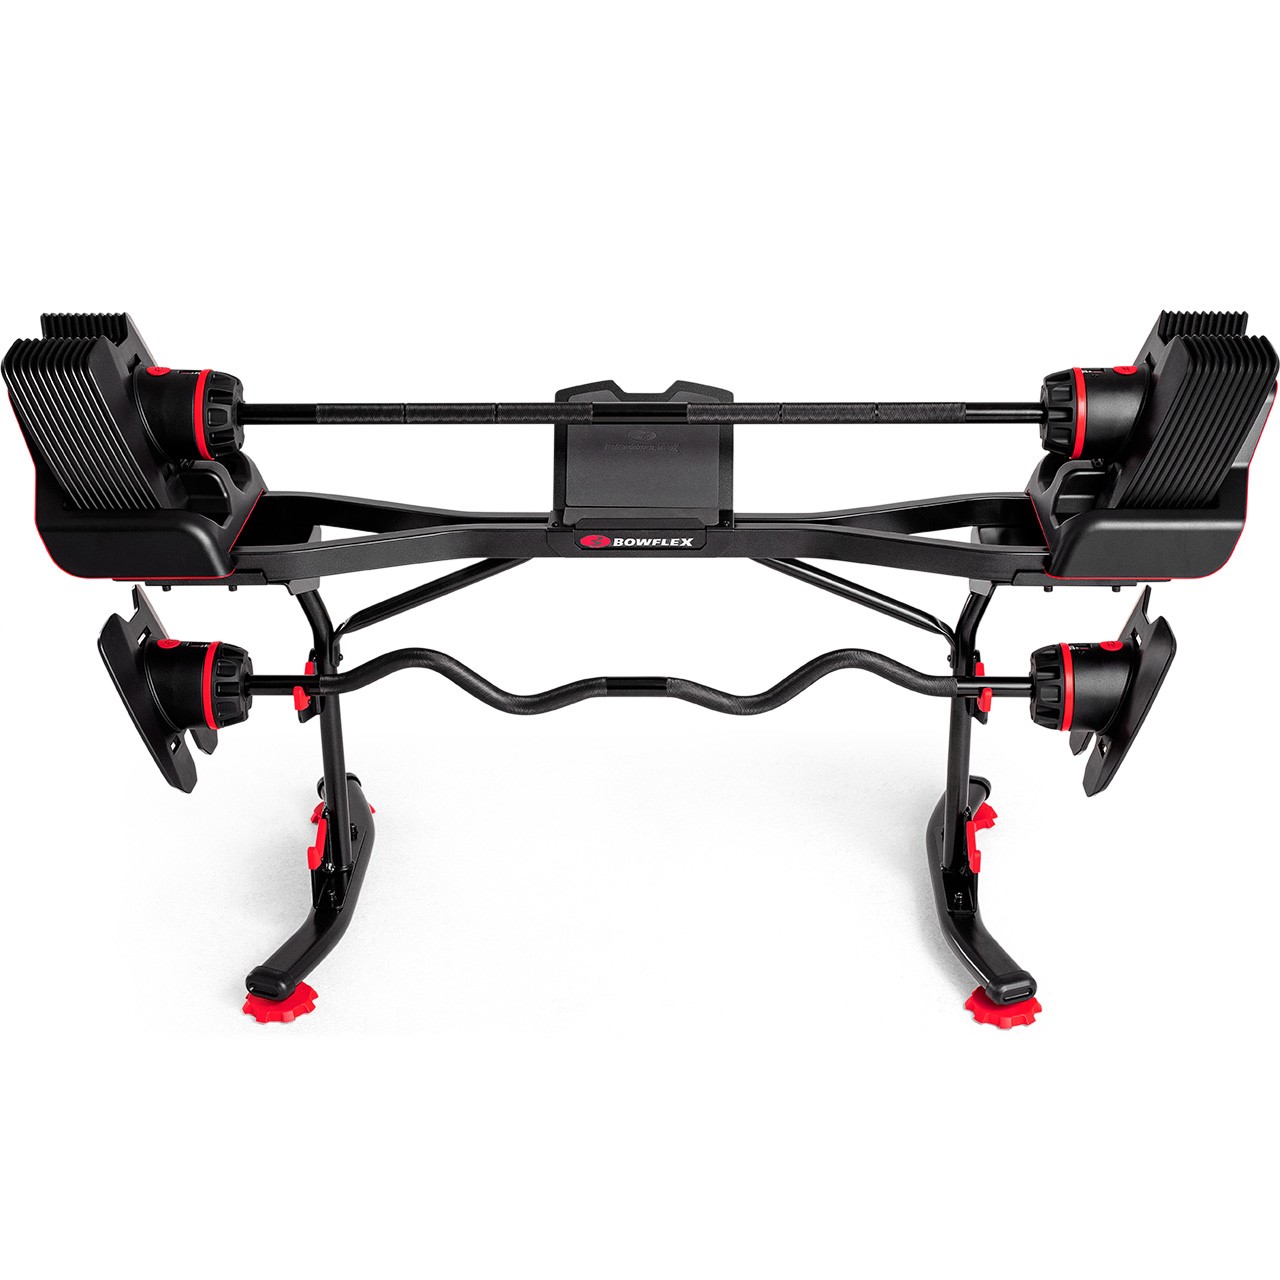 Bowflex SelectTech 2080 Stand with Media Rack